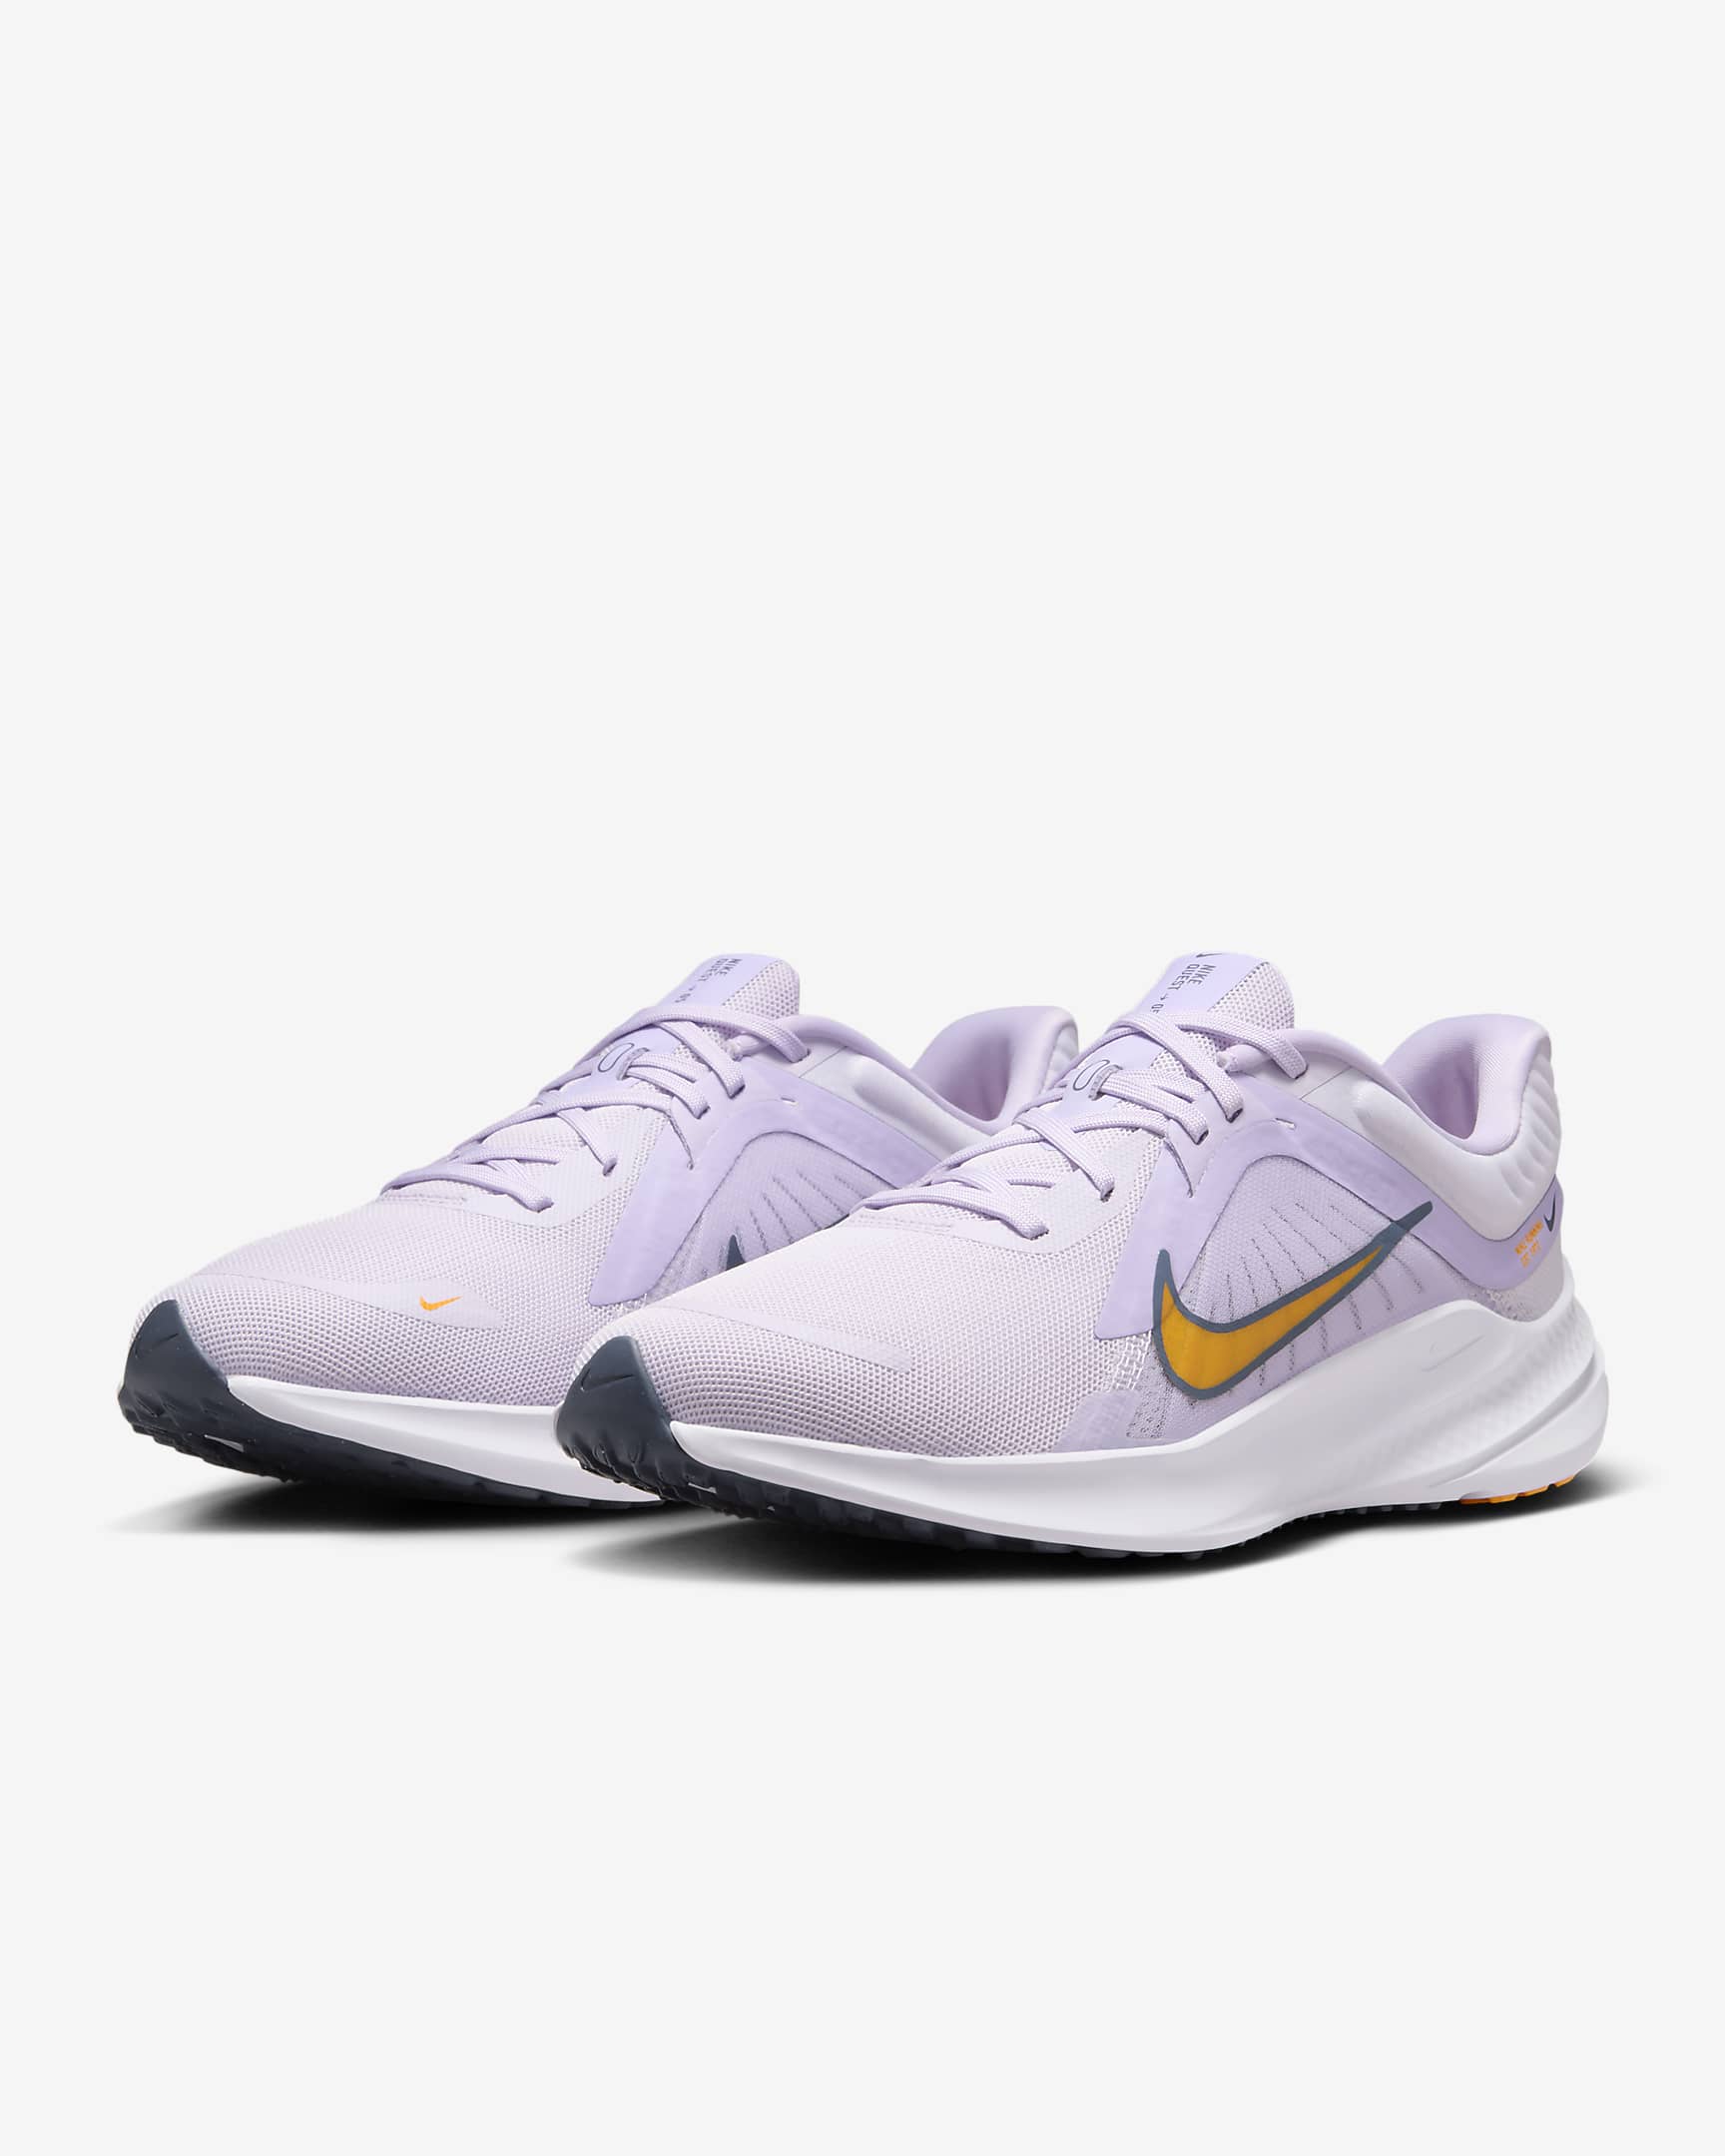 Nike Quest 5 Women's Road Running Shoes - Barely Grape/Violet Mist/Lilac Bloom/Sundial